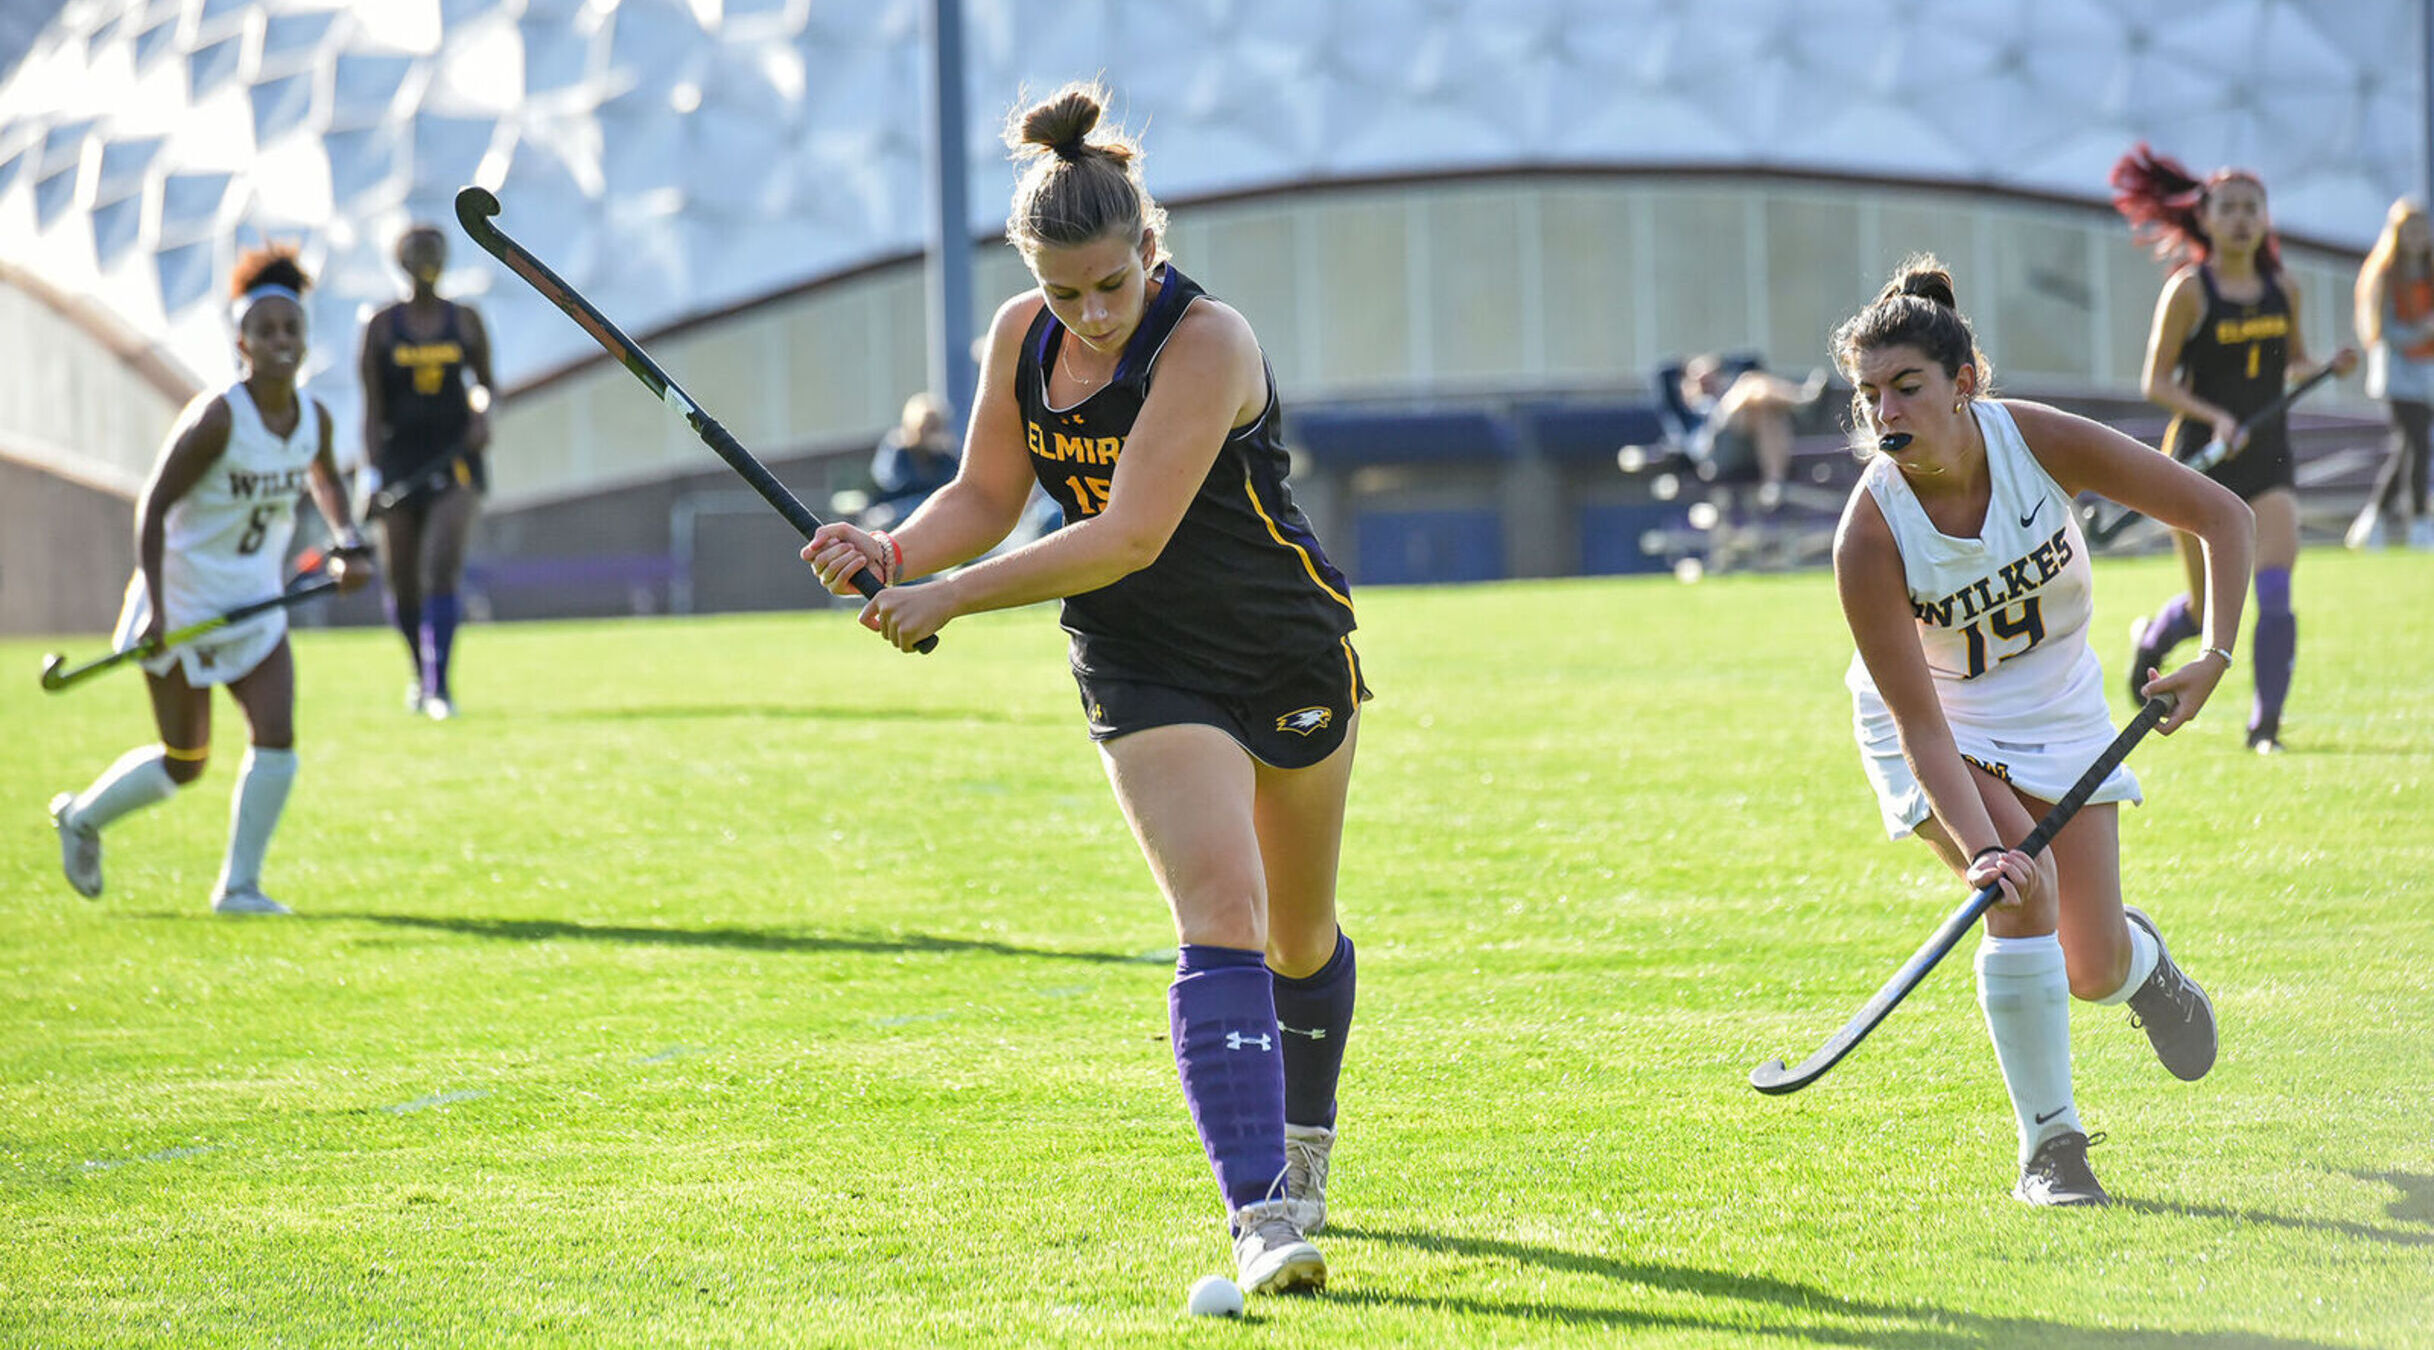 A field hockey player gets ready to hit the ball as a defender approaches